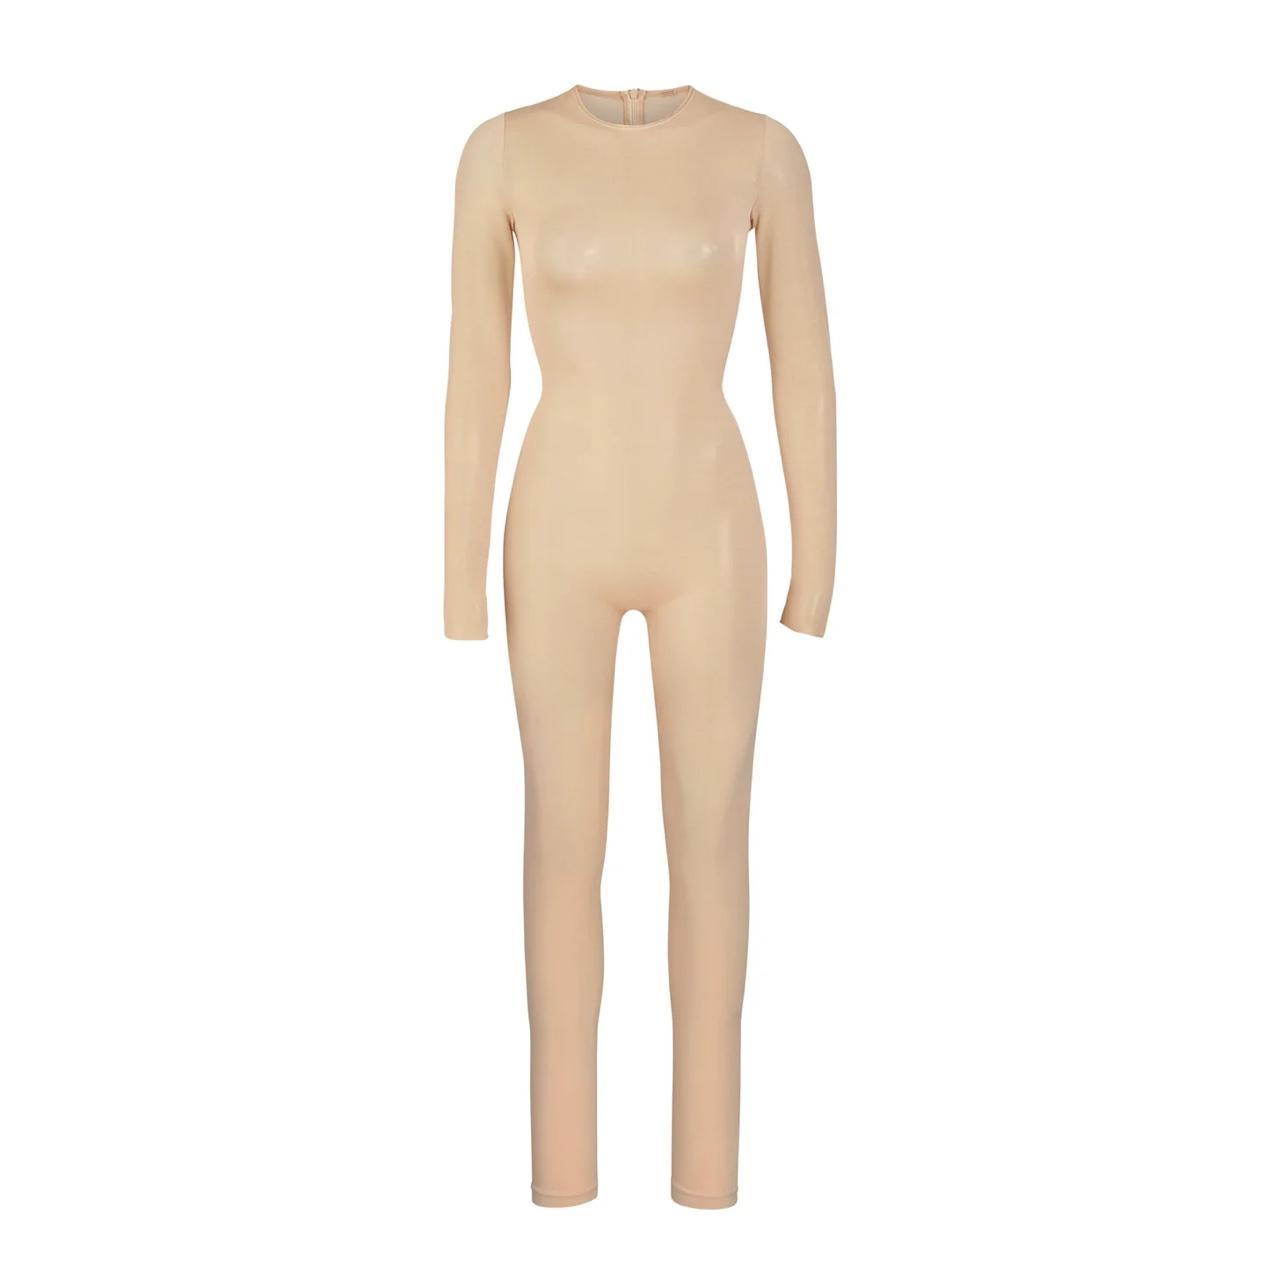 skims, sheer sculpt catsuit in clay, size xs, worn